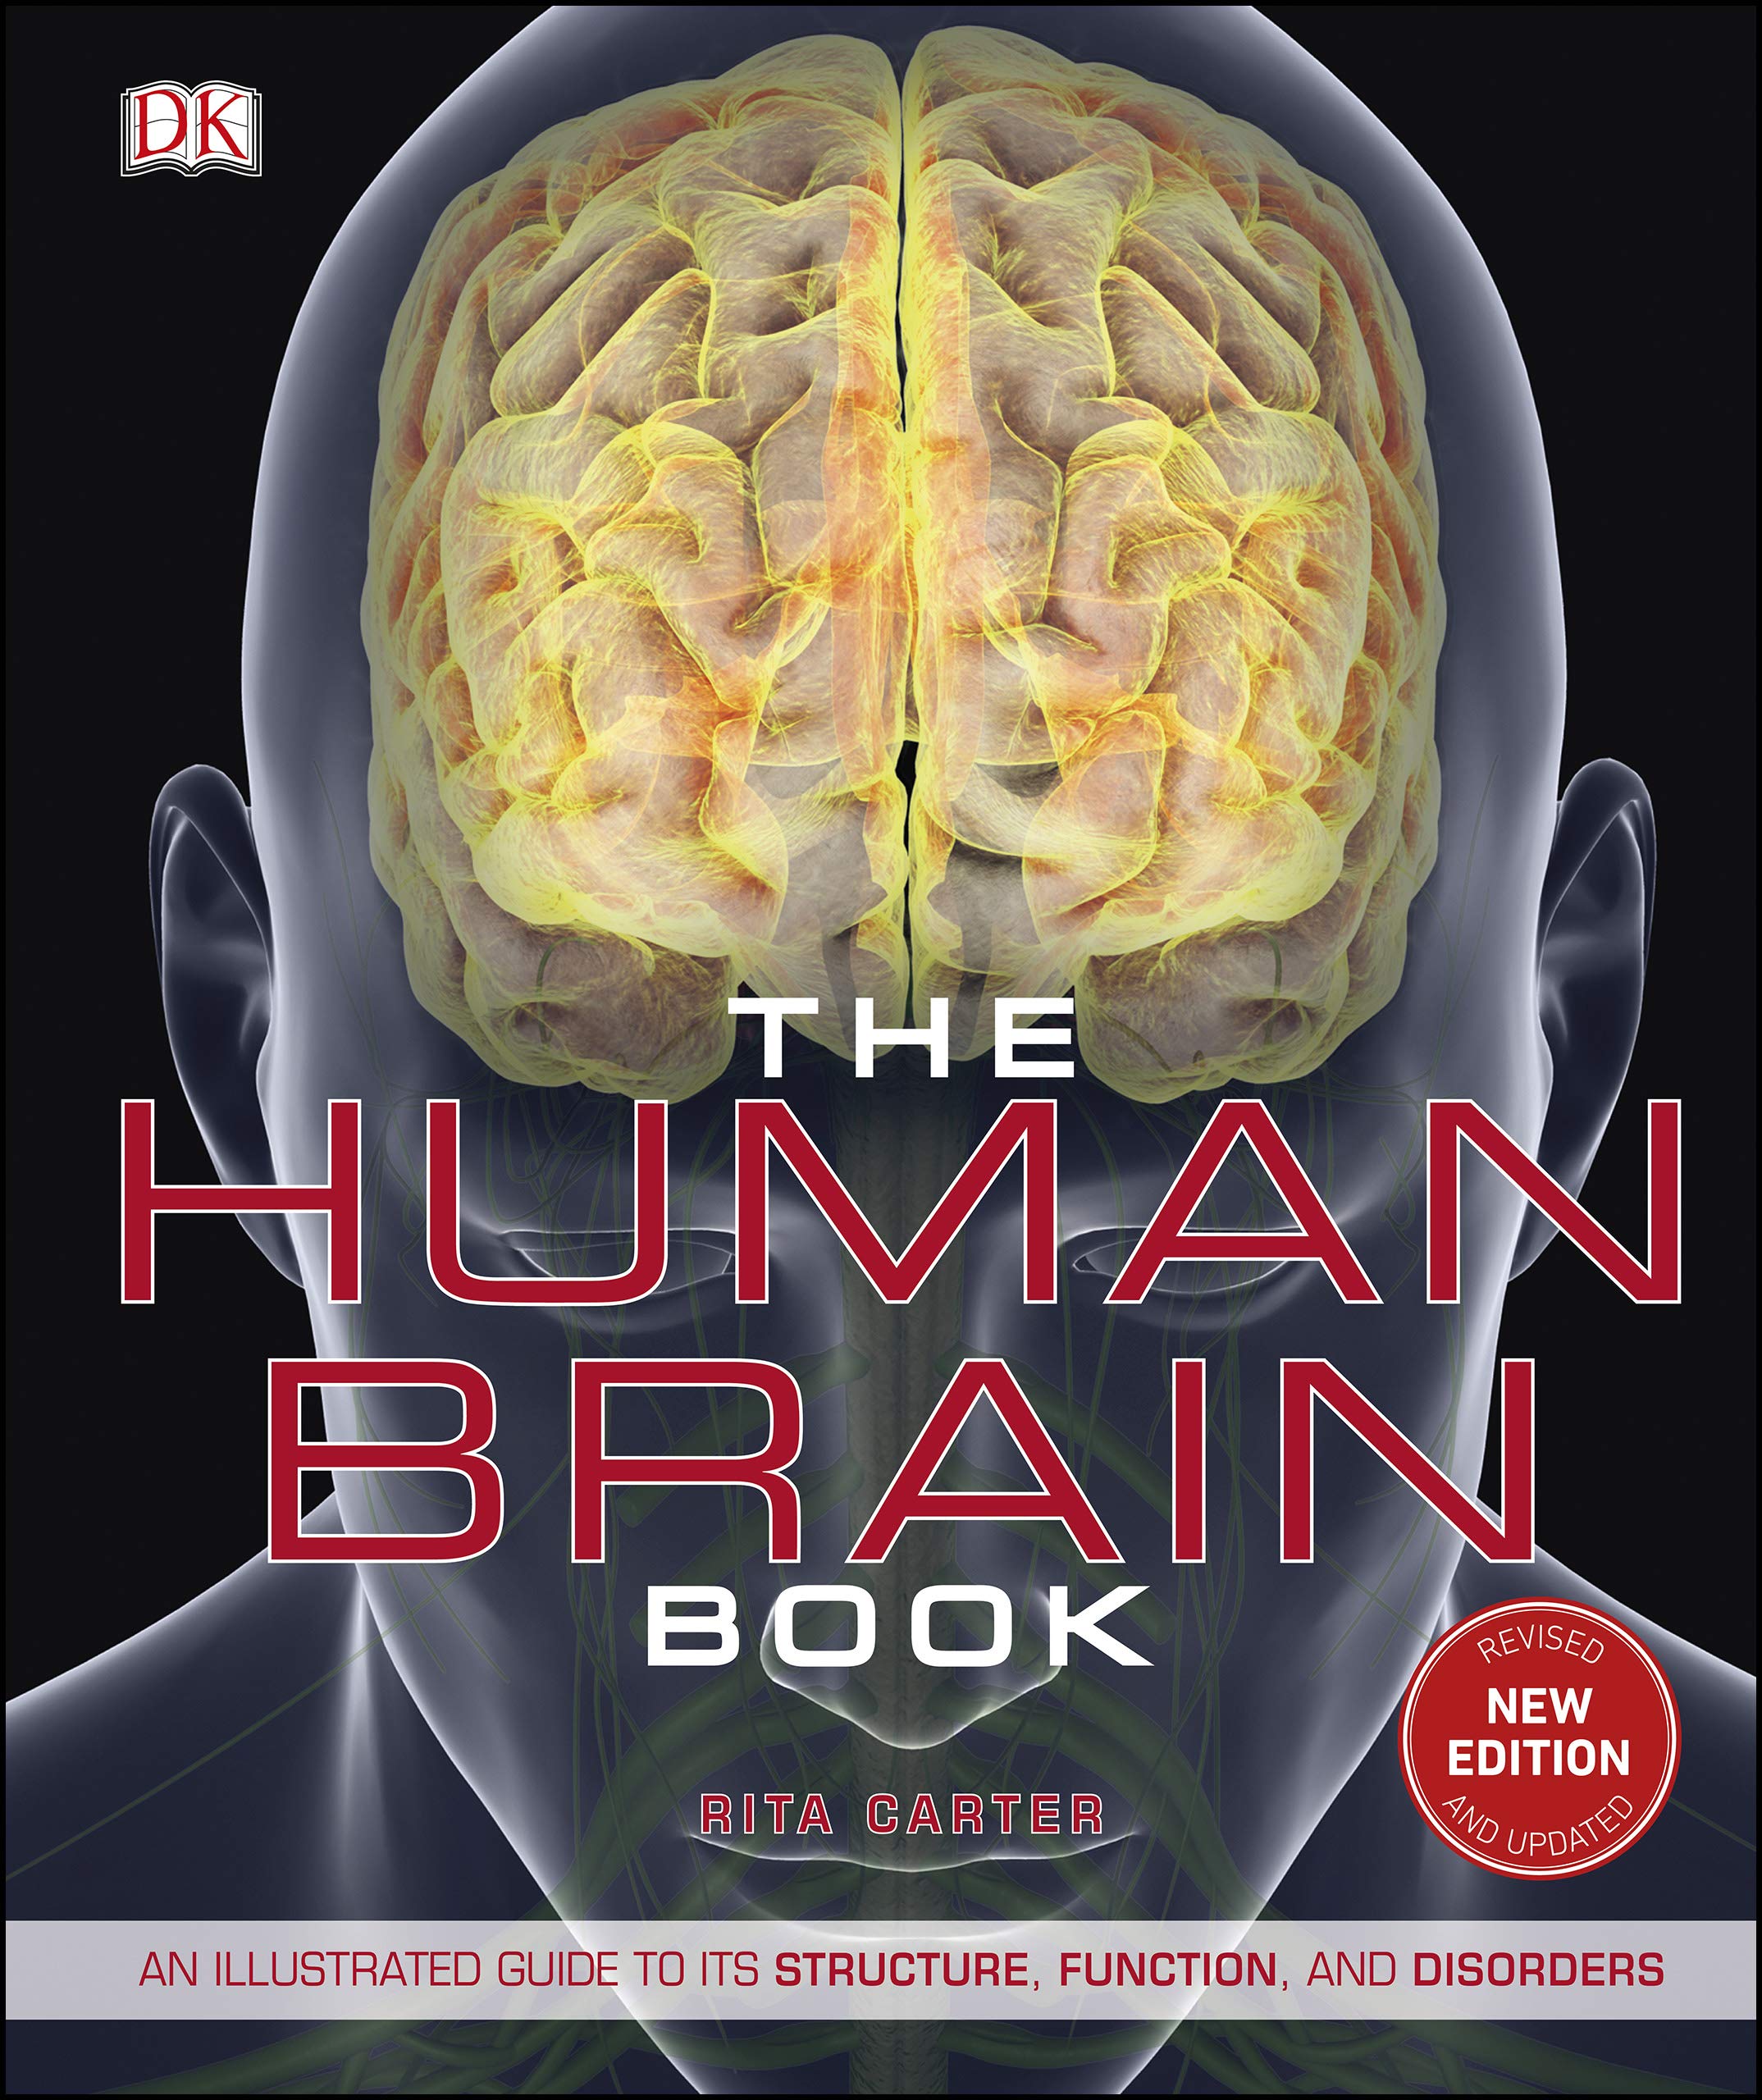 The Human Brain Book: An Illustrated Guide to its Structure, Function, and Disorders (DK Human Body Guides) (eBook) by Rita Carter $1.99